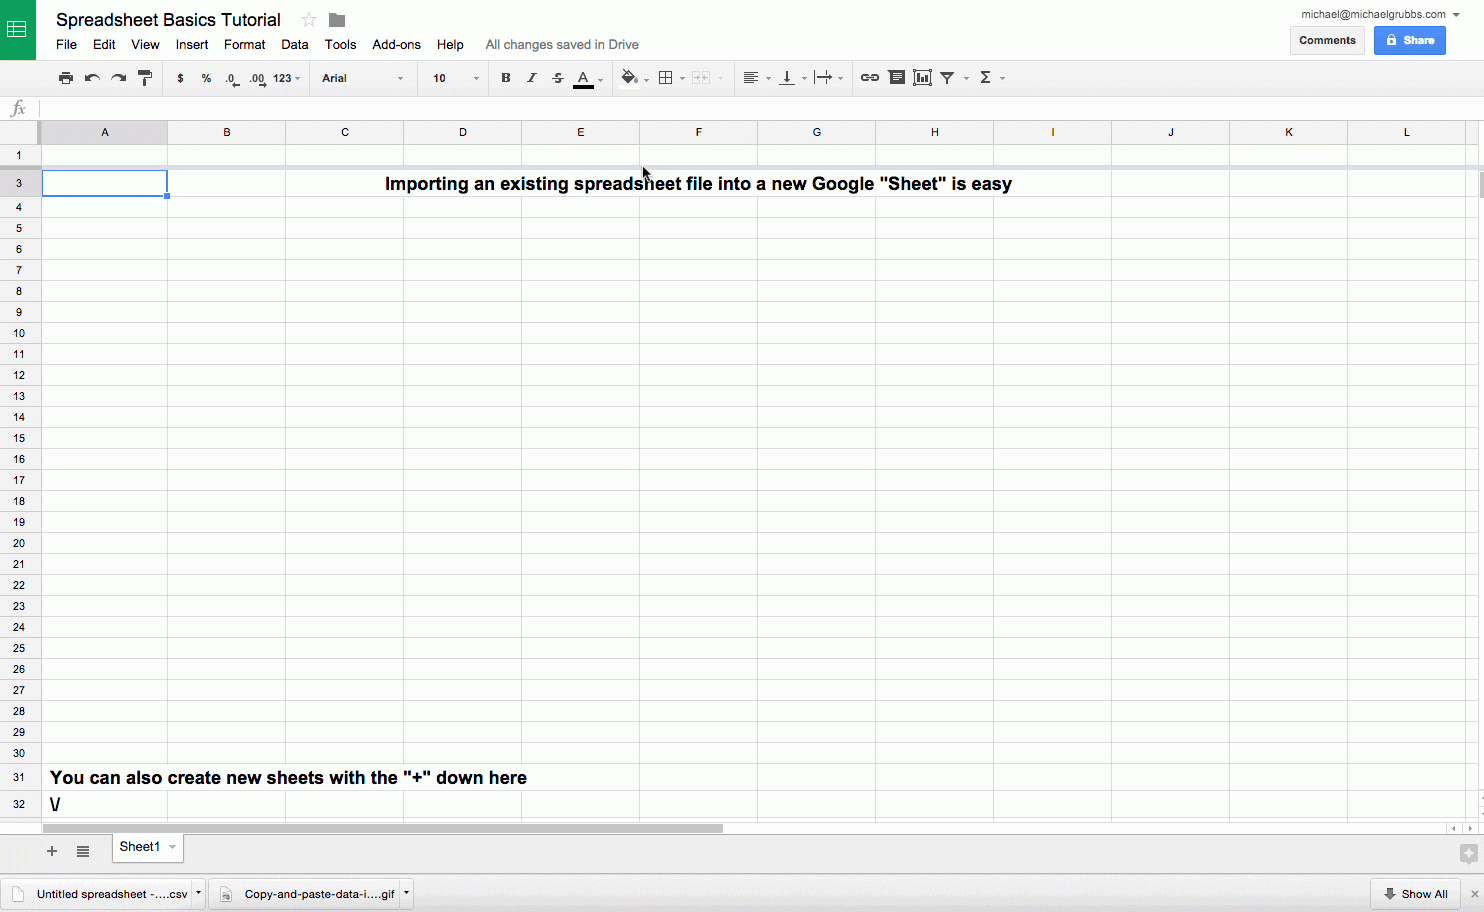 Google Spreadsheet Help In Google Sheets 101: The Beginner's Guide To Online Spreadsheets  The